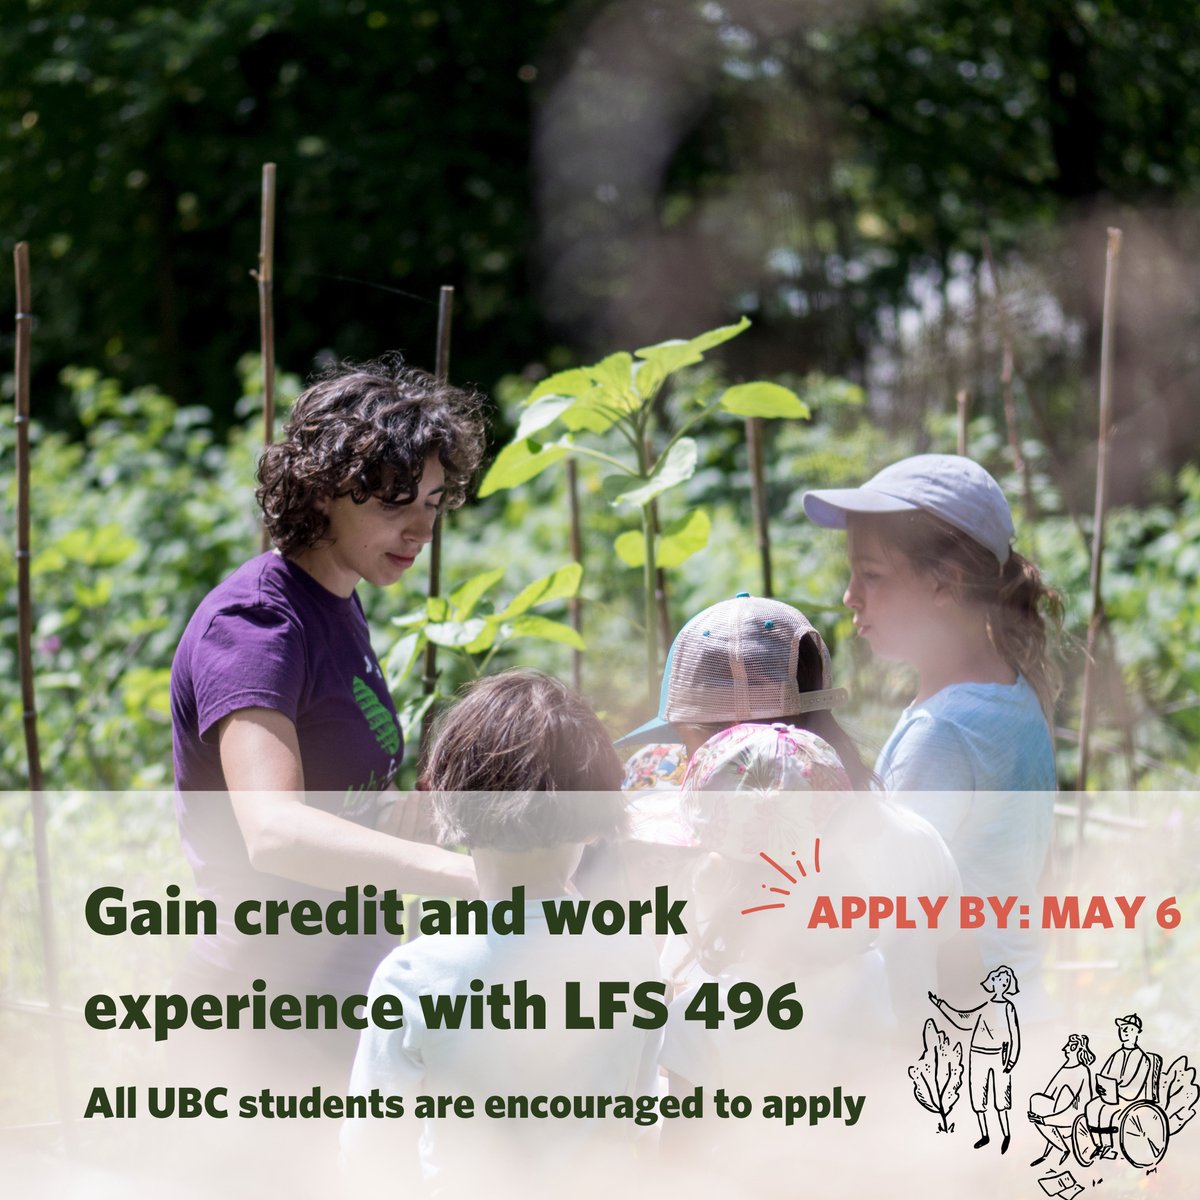 The deadline to apply for LFS 496 career development placements is tomorrow, May 6! Positions include Nature Camps Assistant, Content Creation Assistant, Events and Sites Assistant, Experiential Learning Community Educator, and more. ubcfarm.ubc.ca/learn/lfs496/